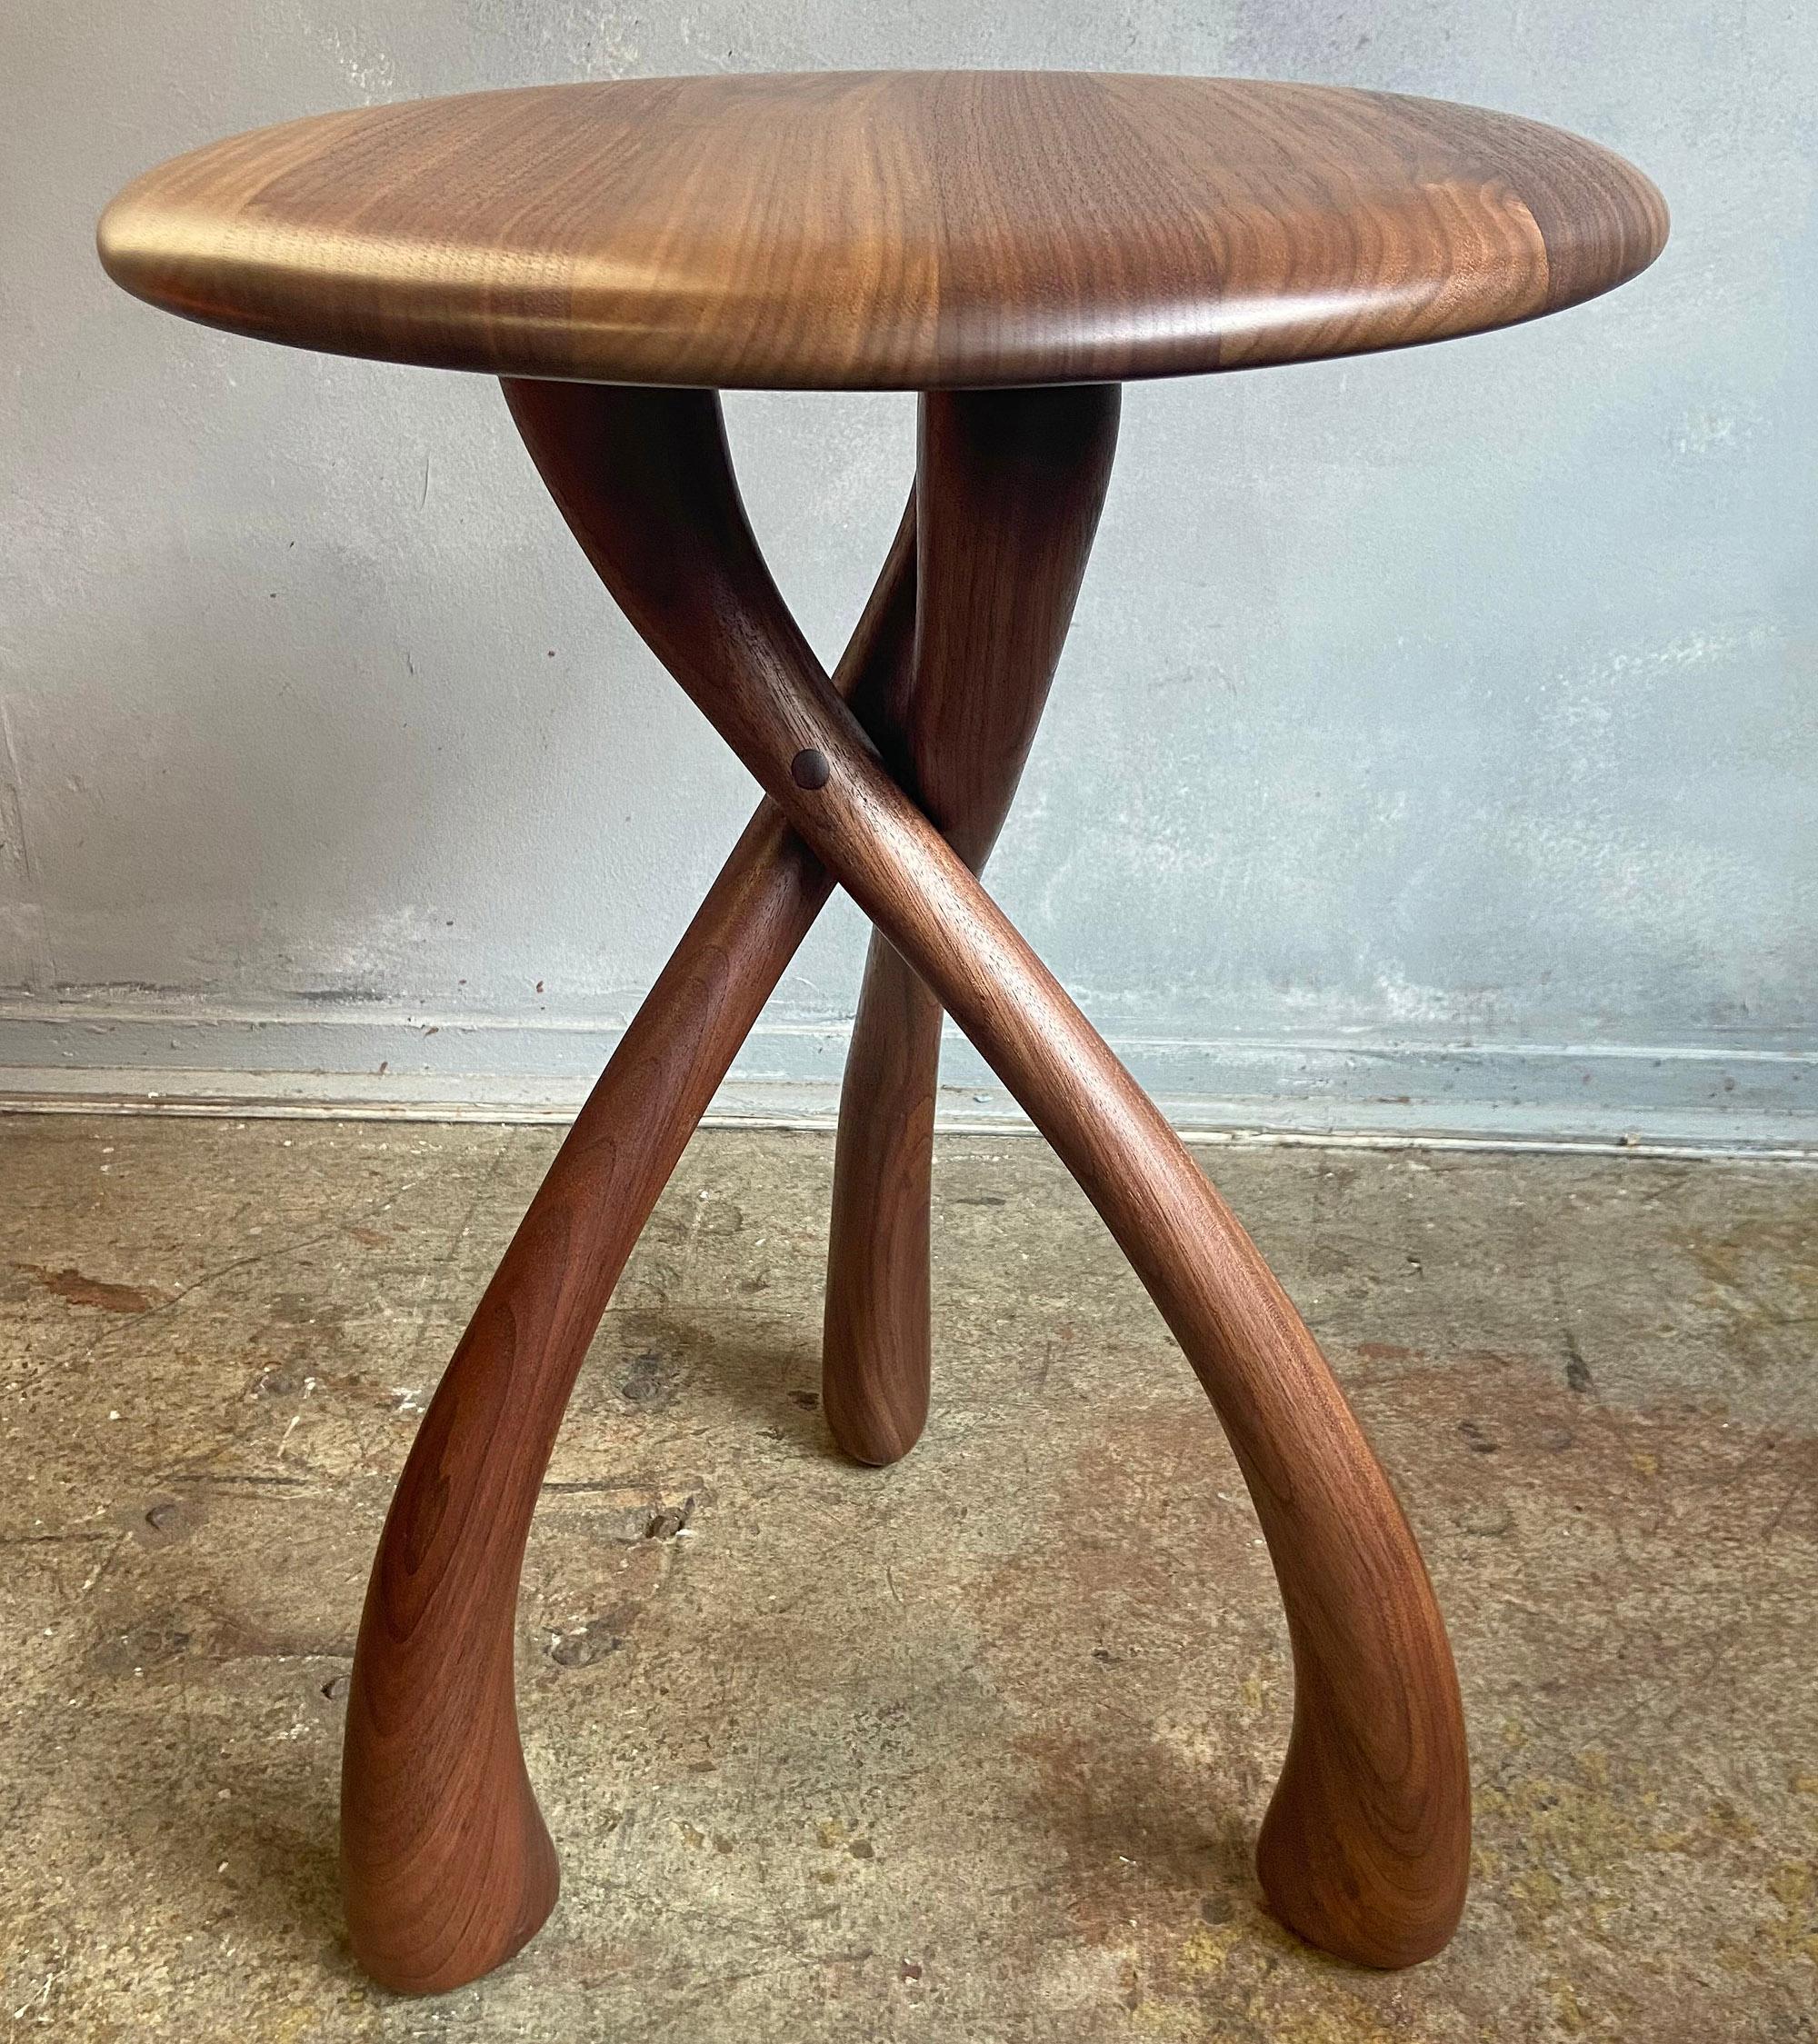 Beautiful wishbone circular tables designed by Dean Santner featuring solid black walnut construction. This amazing design looks simple yet complex at the same time. Gorgeous rounded waterfall edge and graceful carved lines. A wonderful American